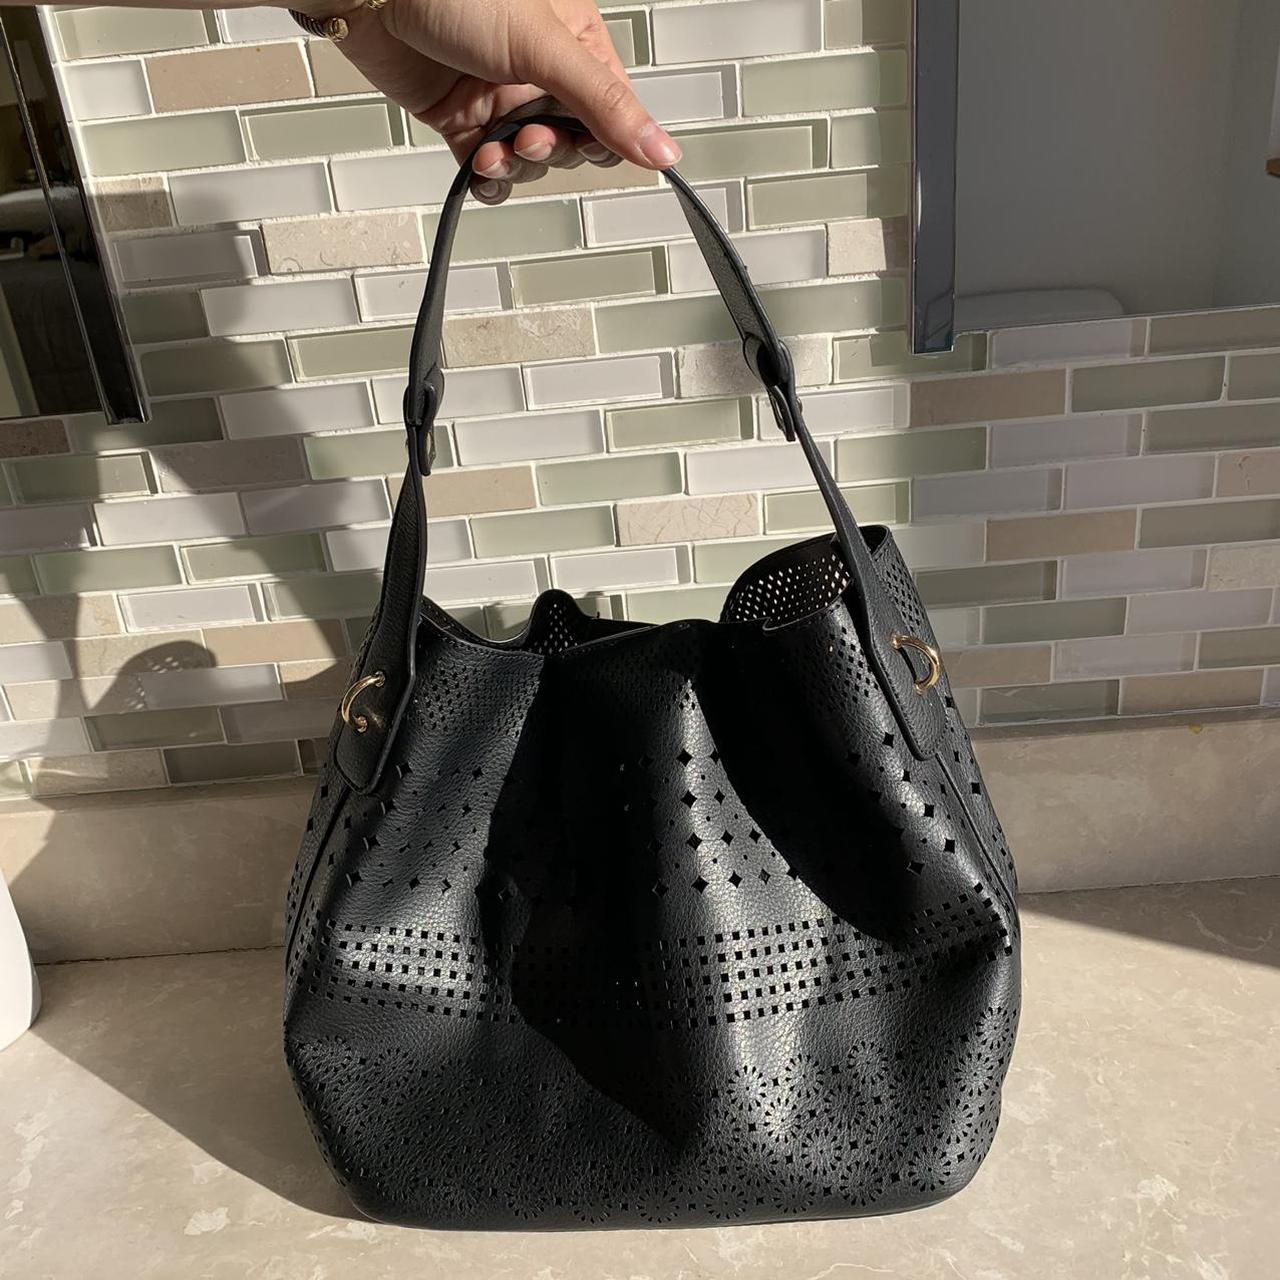 Product Image 2 - 🖤LASER-CUT LEATHER BAG!🖤
Beautiful black leather